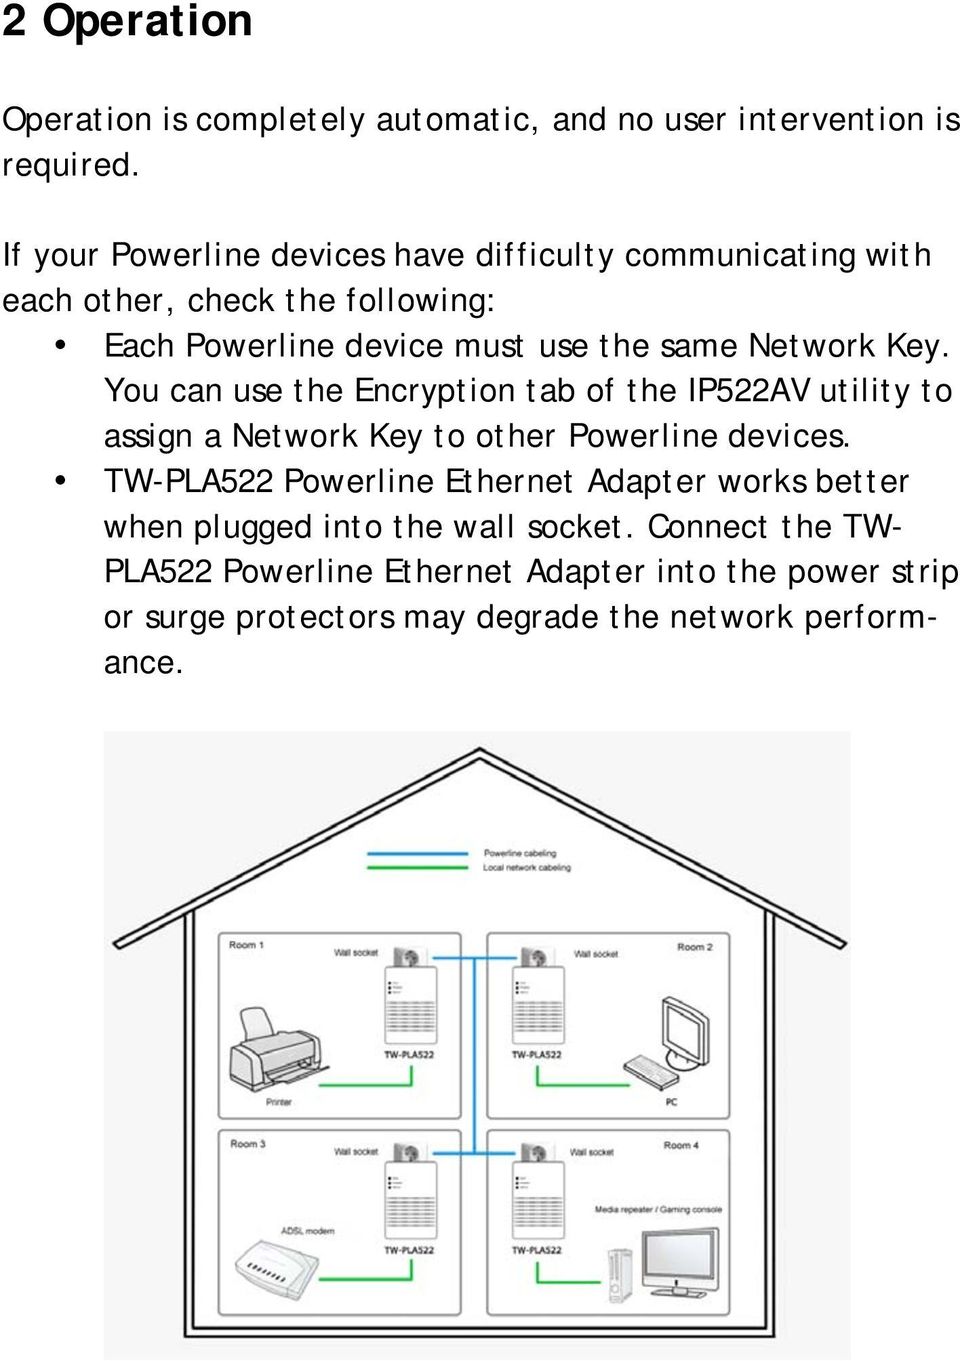 Network Key. You can use the Encryption tab of the IP522AV utility to assign a Network Key to other Powerline devices.